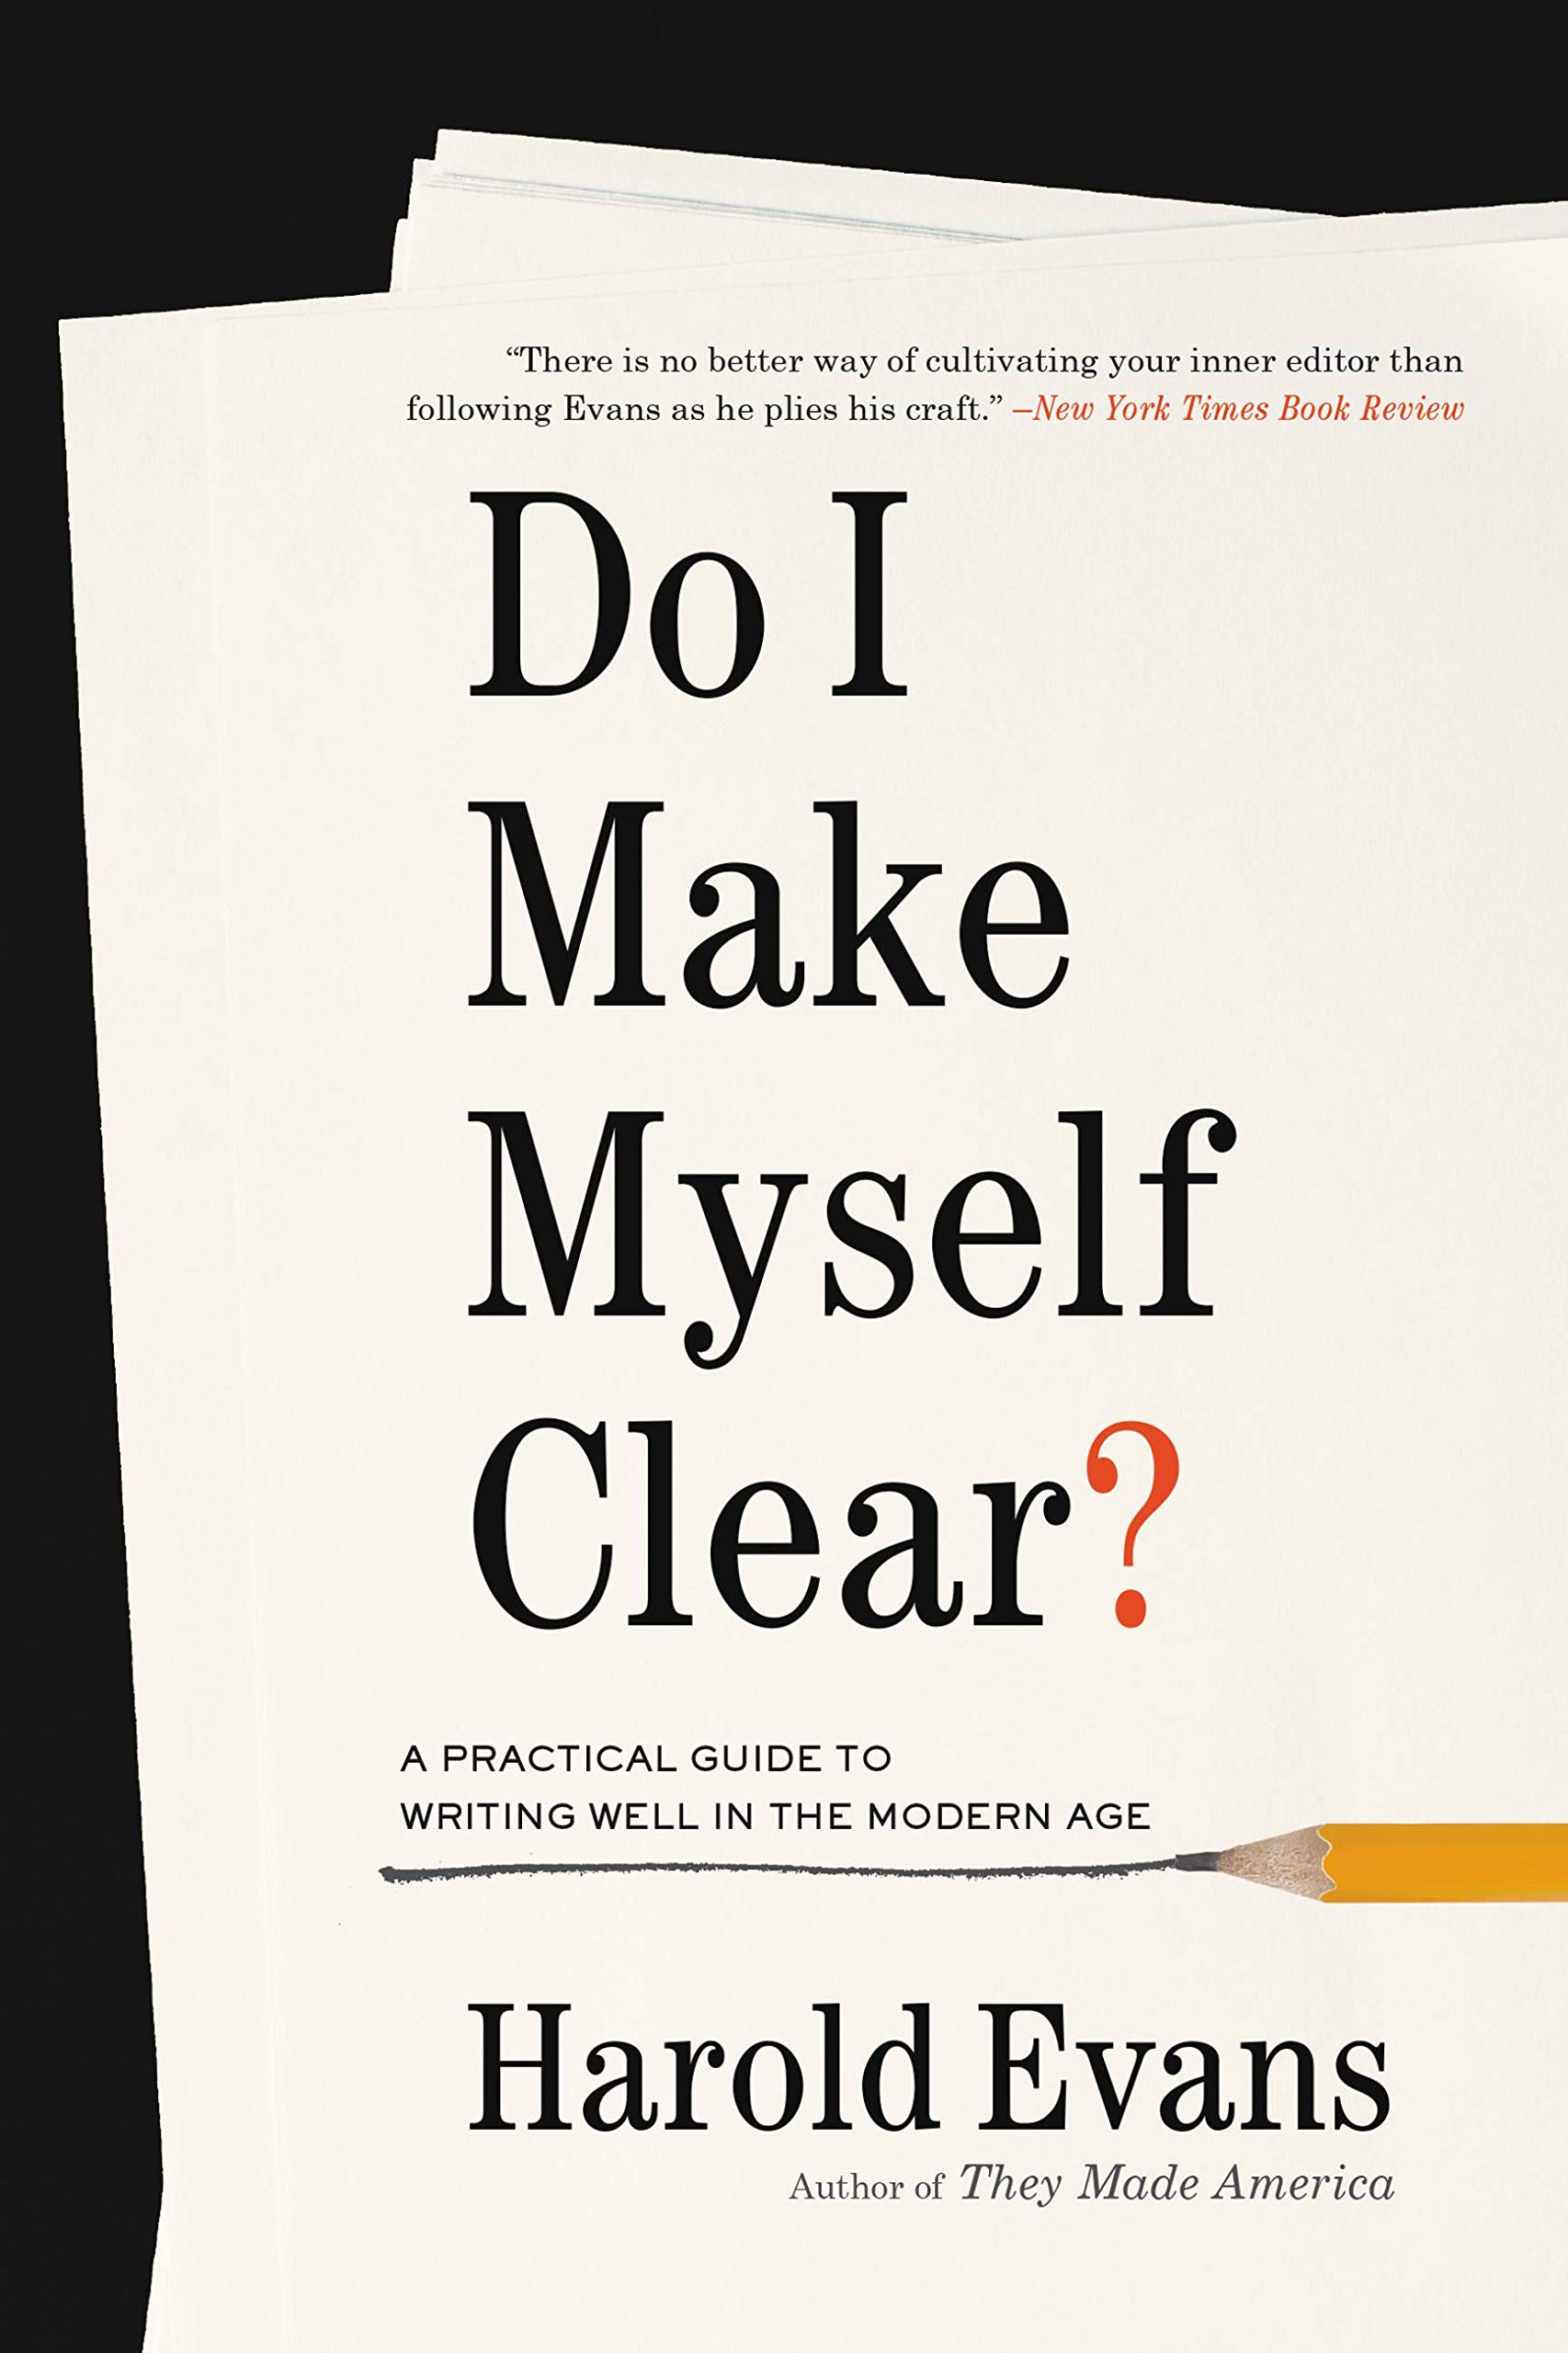 The cover of Do I Make Myself Clear?